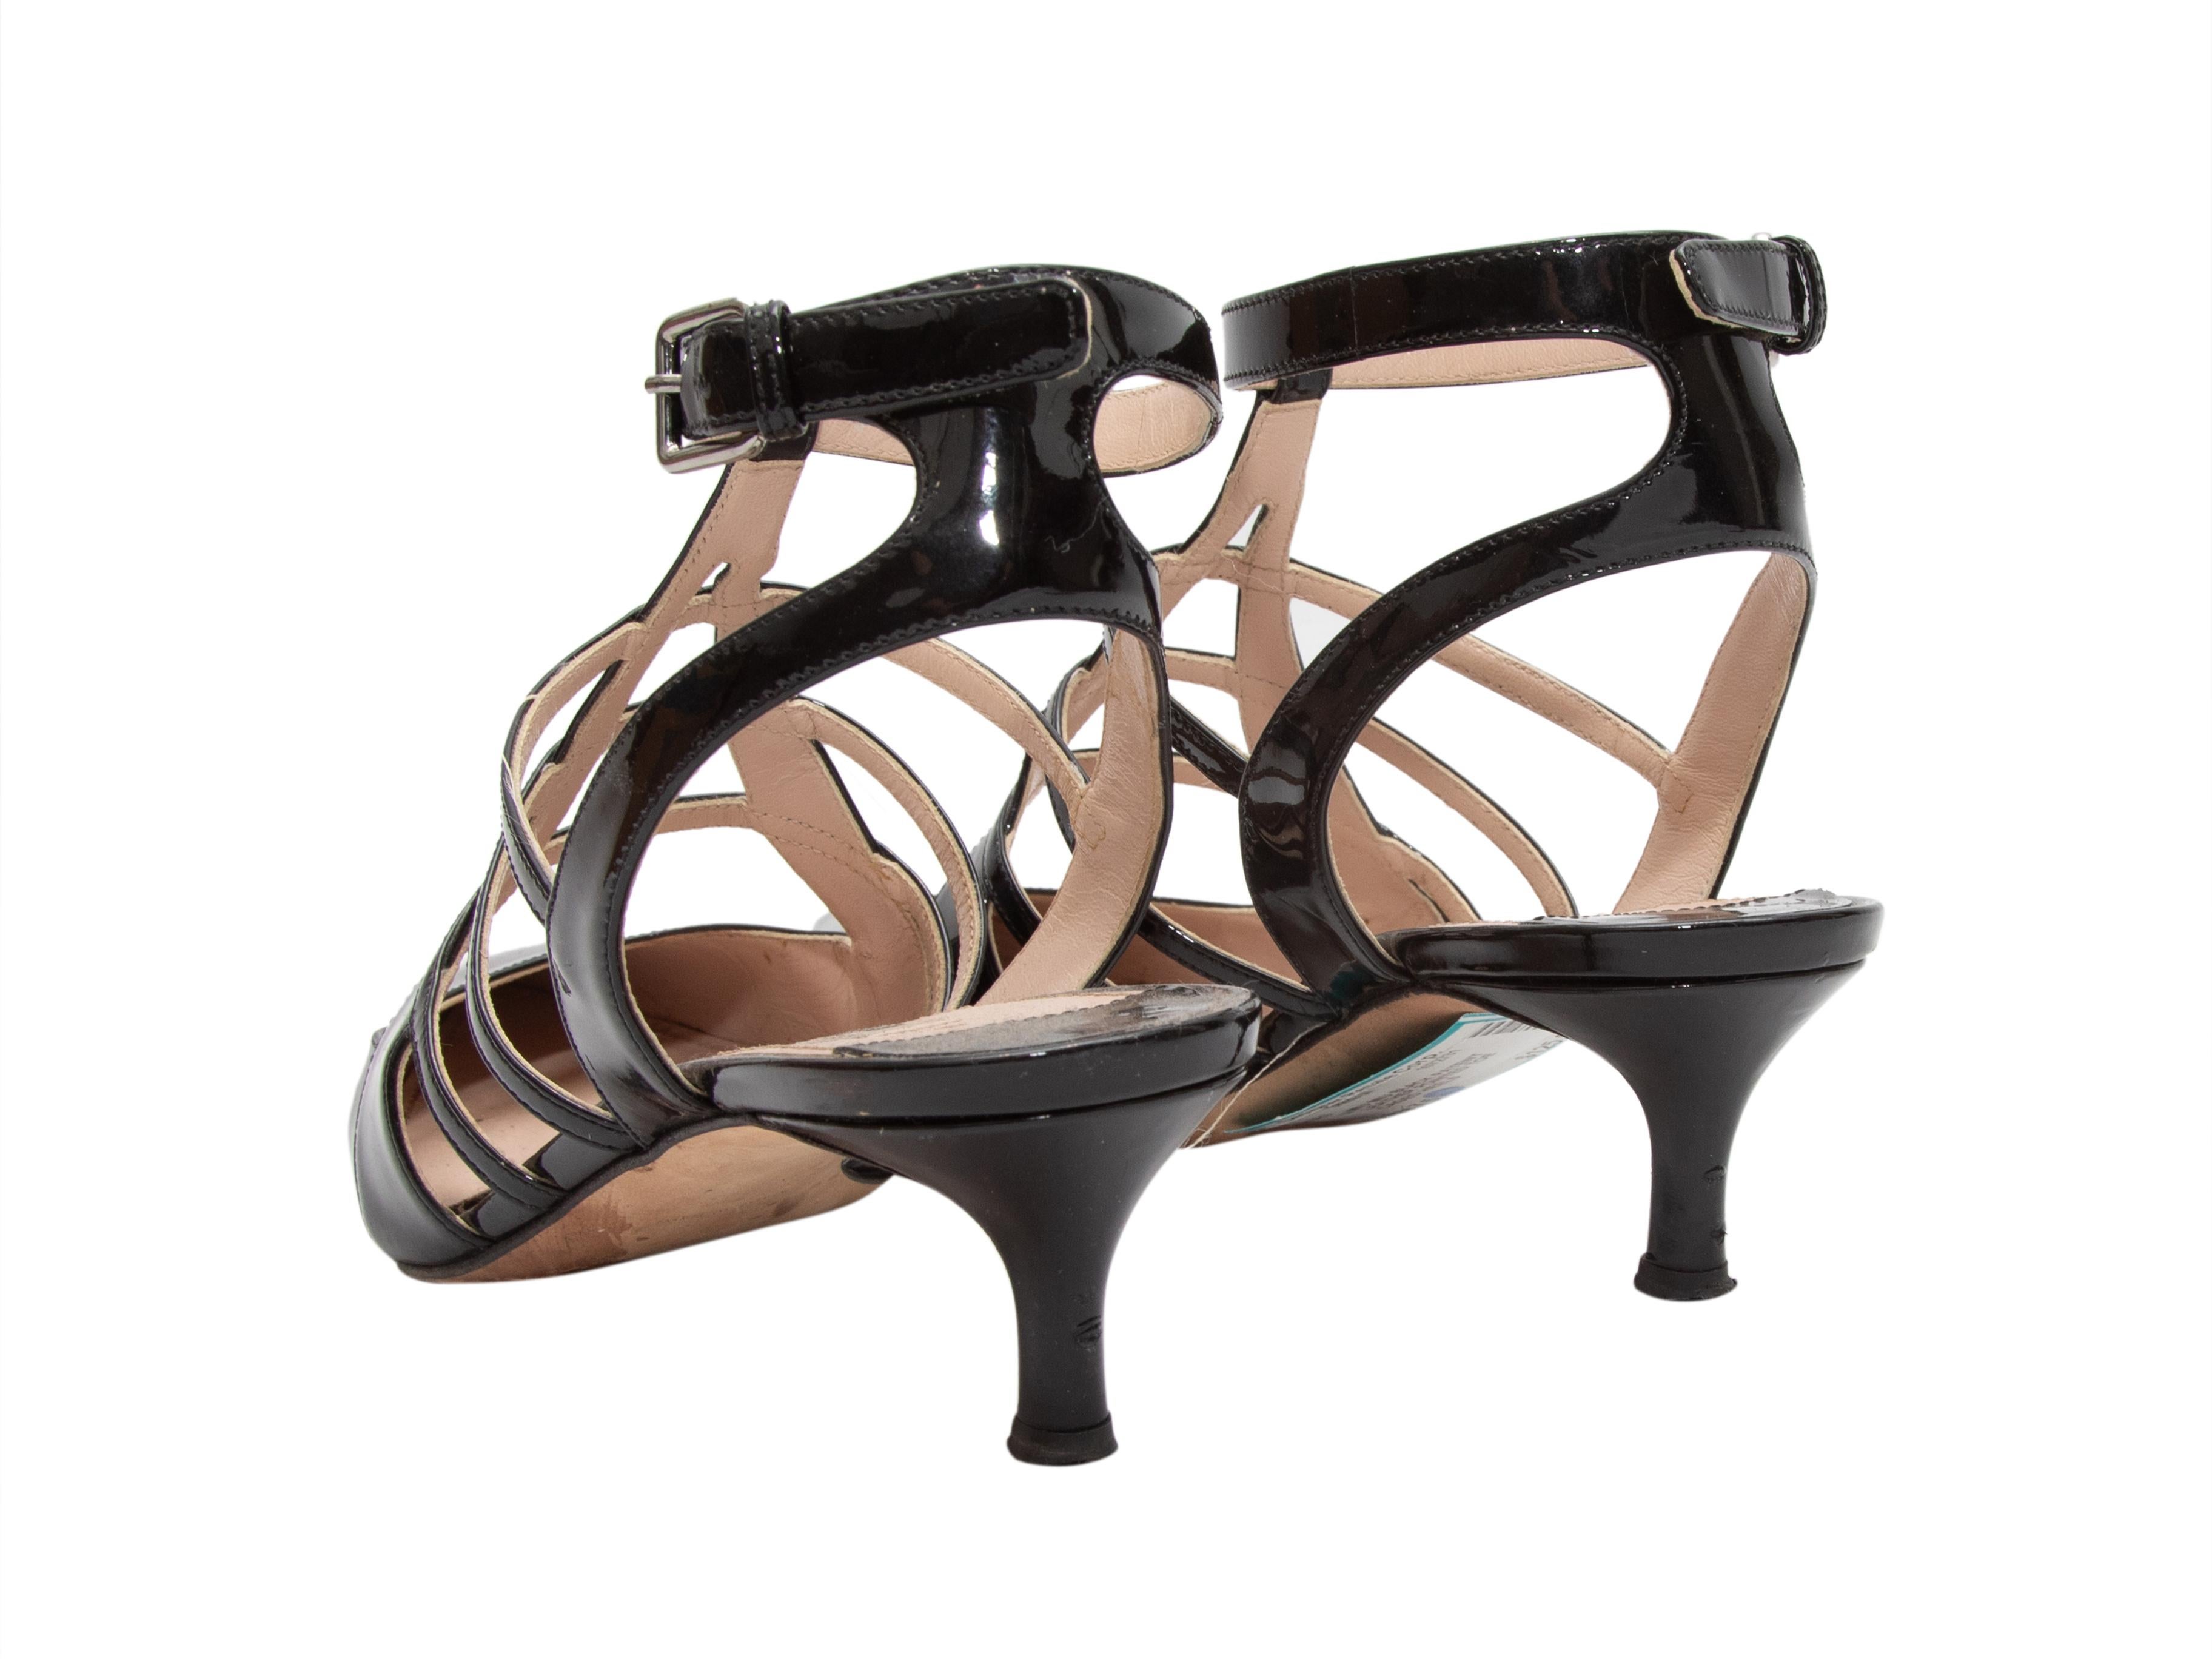 Black pointed-toe patent leather cage heels by Miu Miu. Kitten heels. Buckle closures at ankle straps. 2